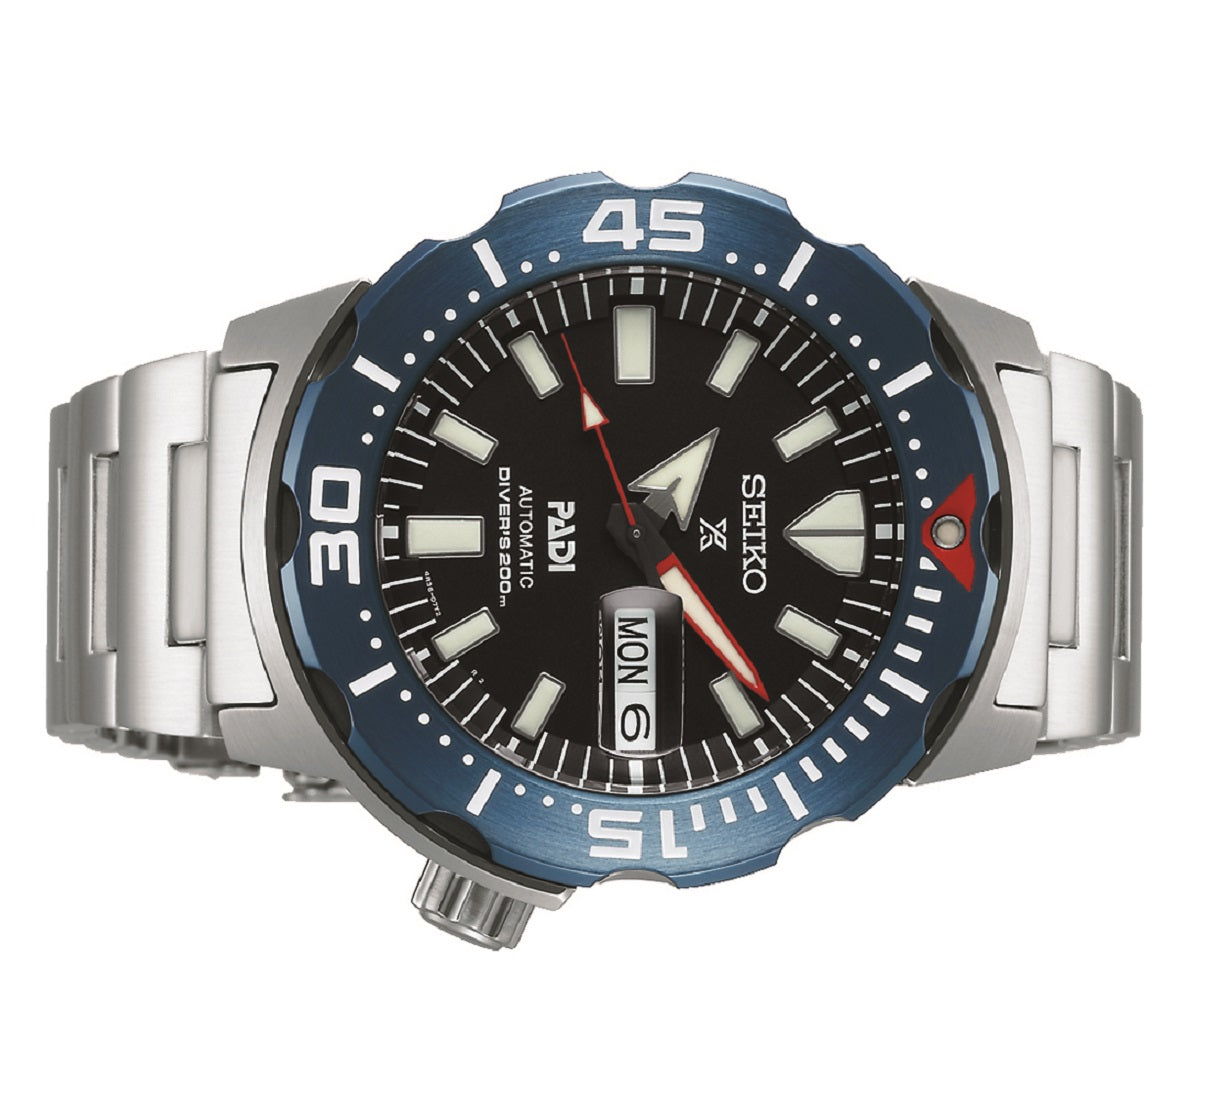 Seiko SRPE27K1 Prospex Monster PADI Special Edition Automatic Watch-Watch Portal Philippines